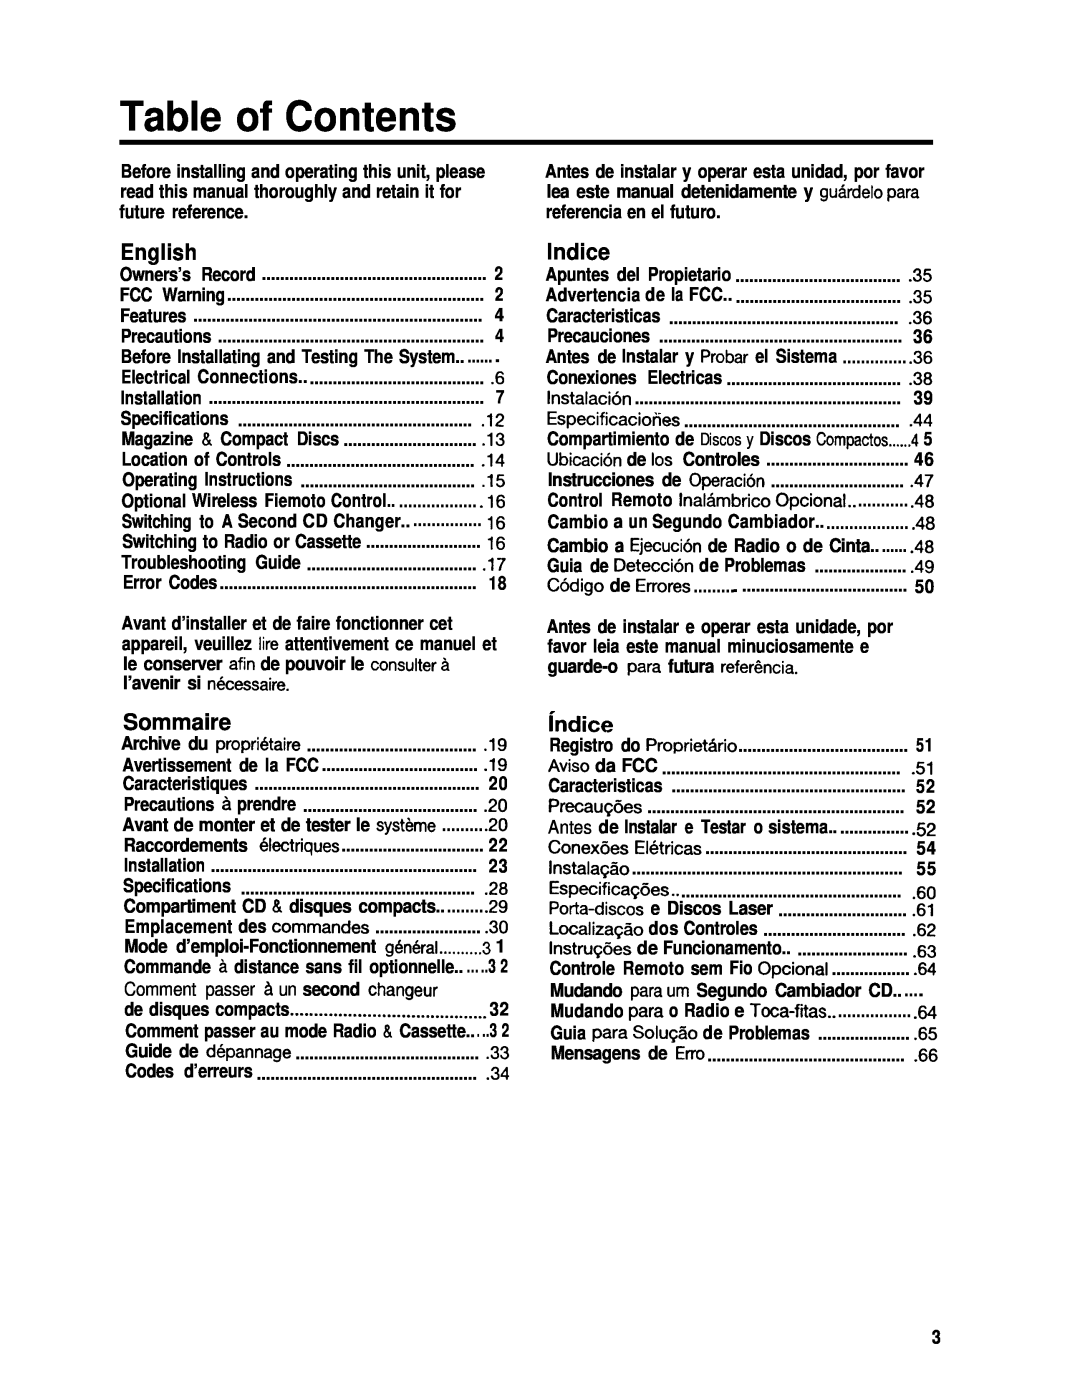 Blaupunkt CDC-RF6IR manual Table of Contents, English, Sommaire, lndice, indice, Comment passer A un second changeur 